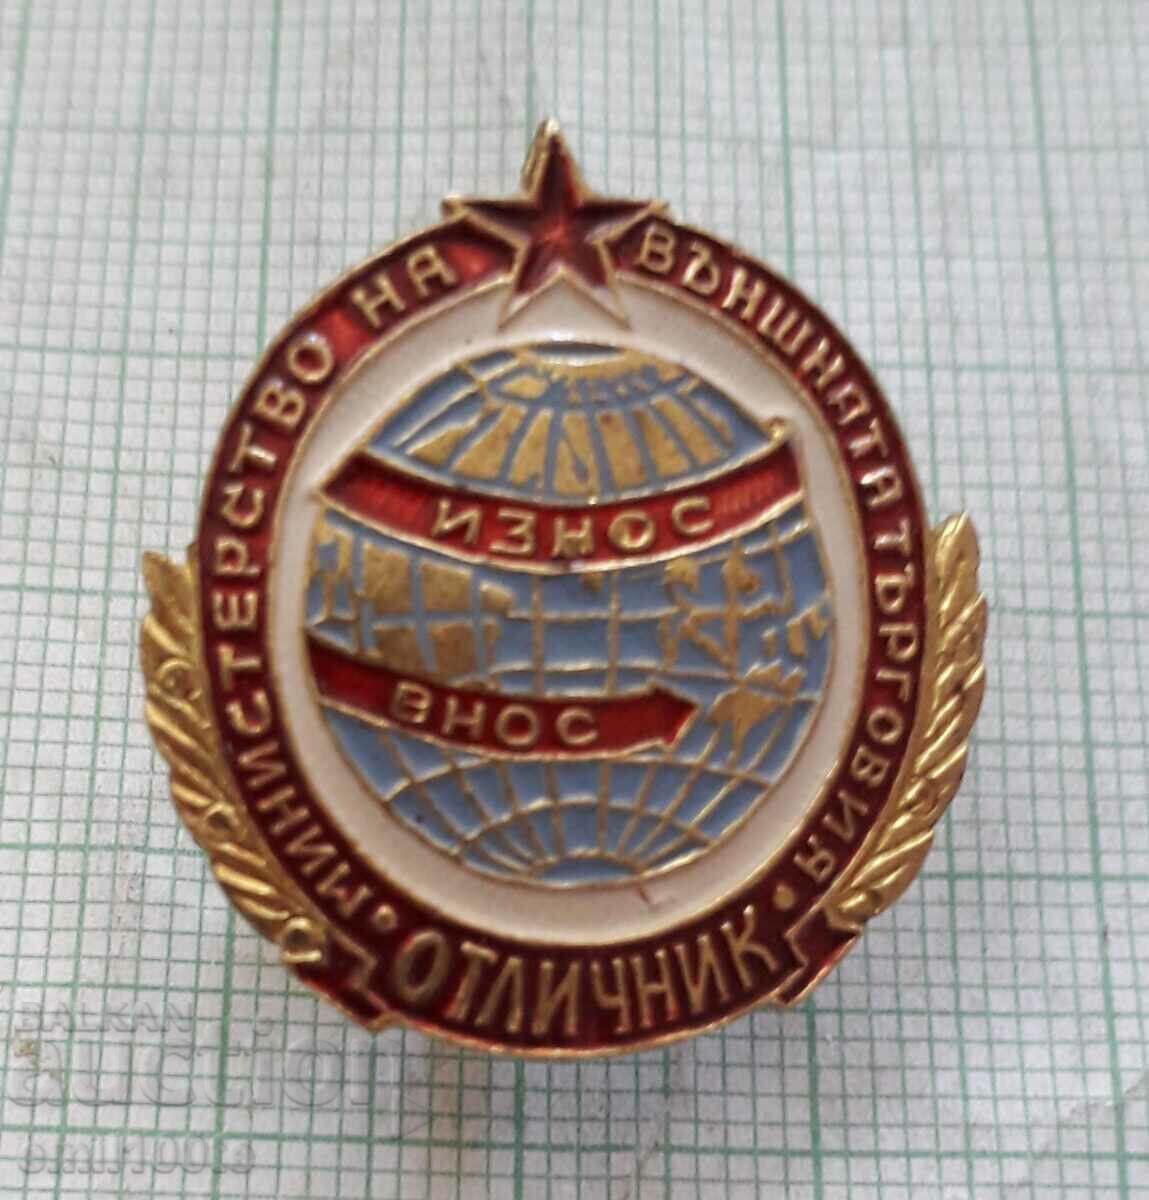 Badge - Excellent Ministry of Foreign Trade export vno